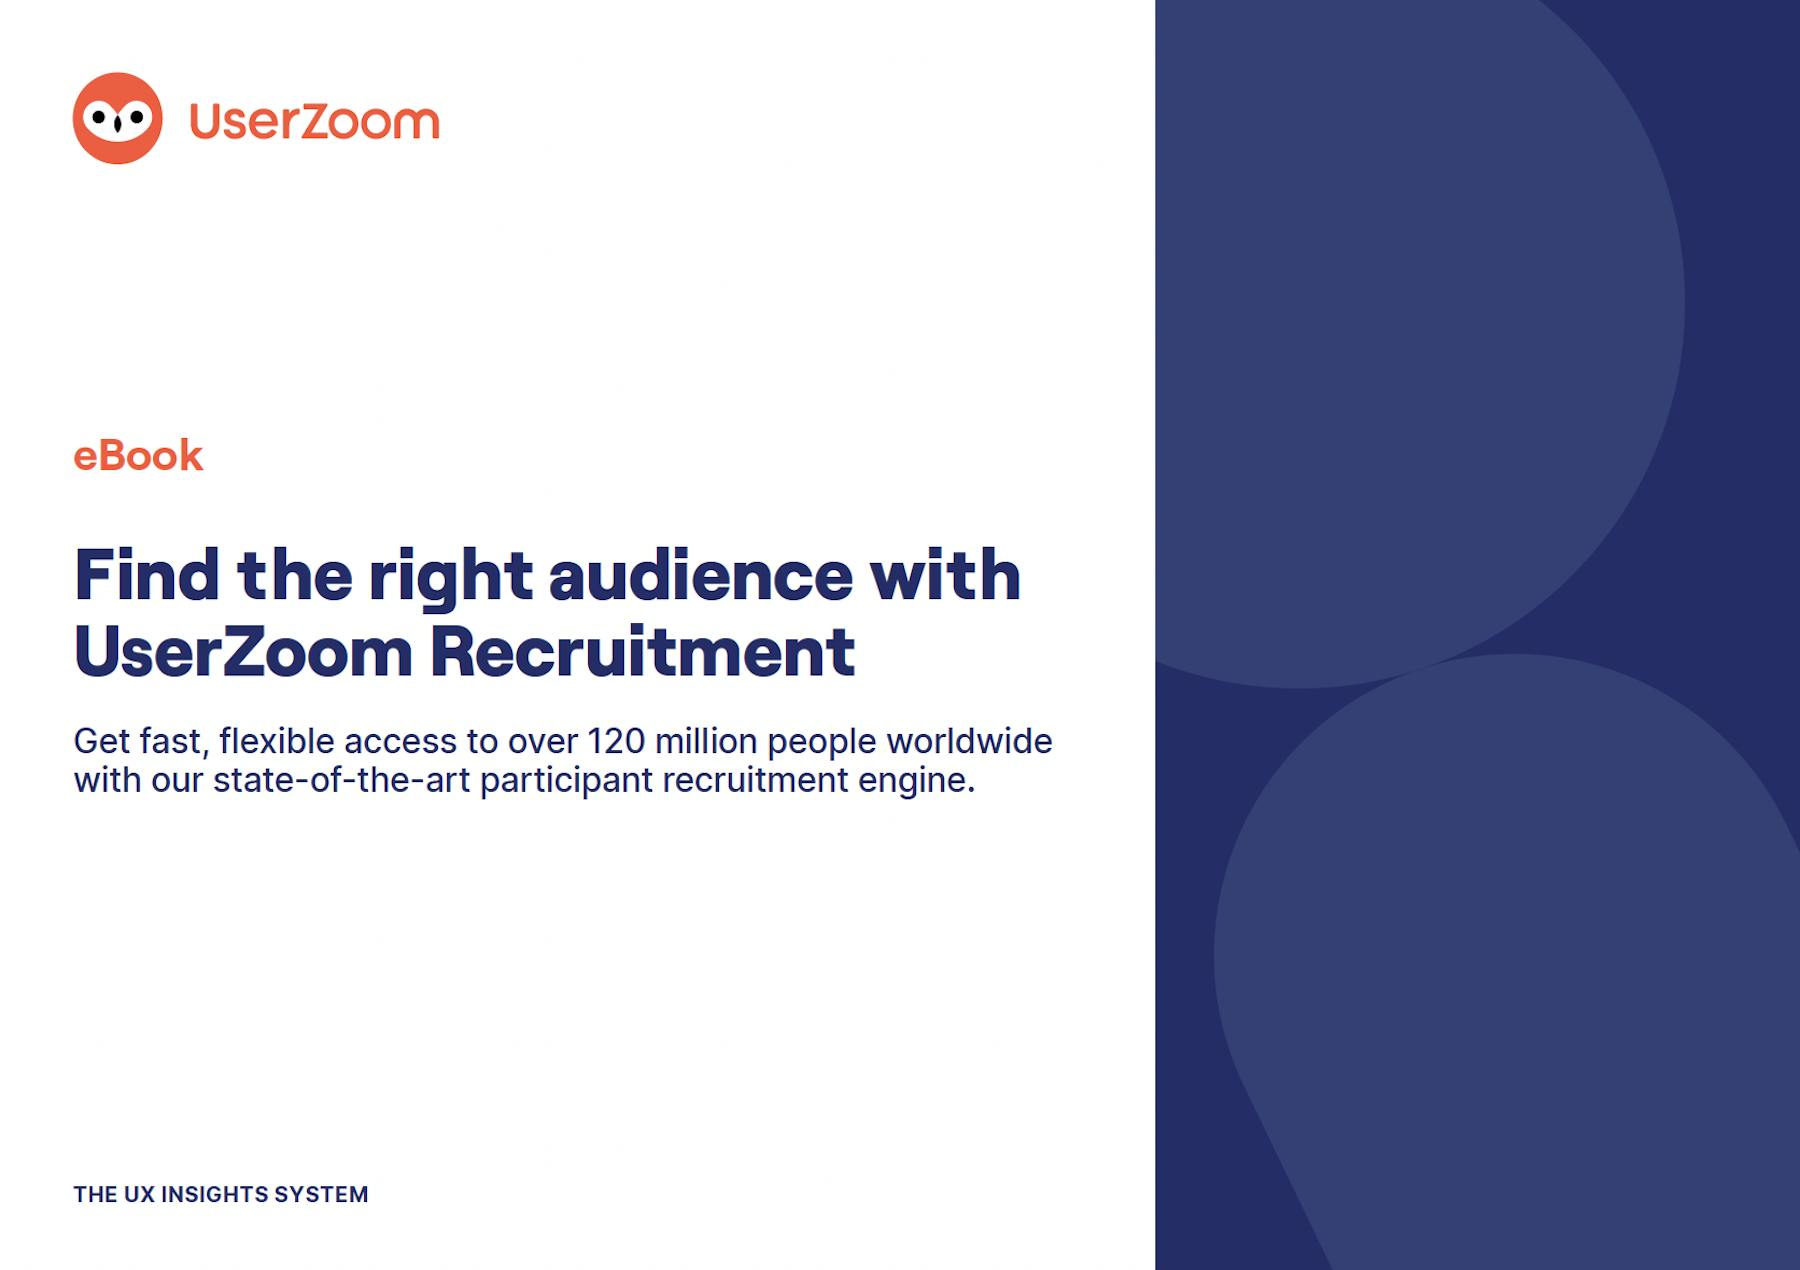 Find the right audience with UserZoom recruitment